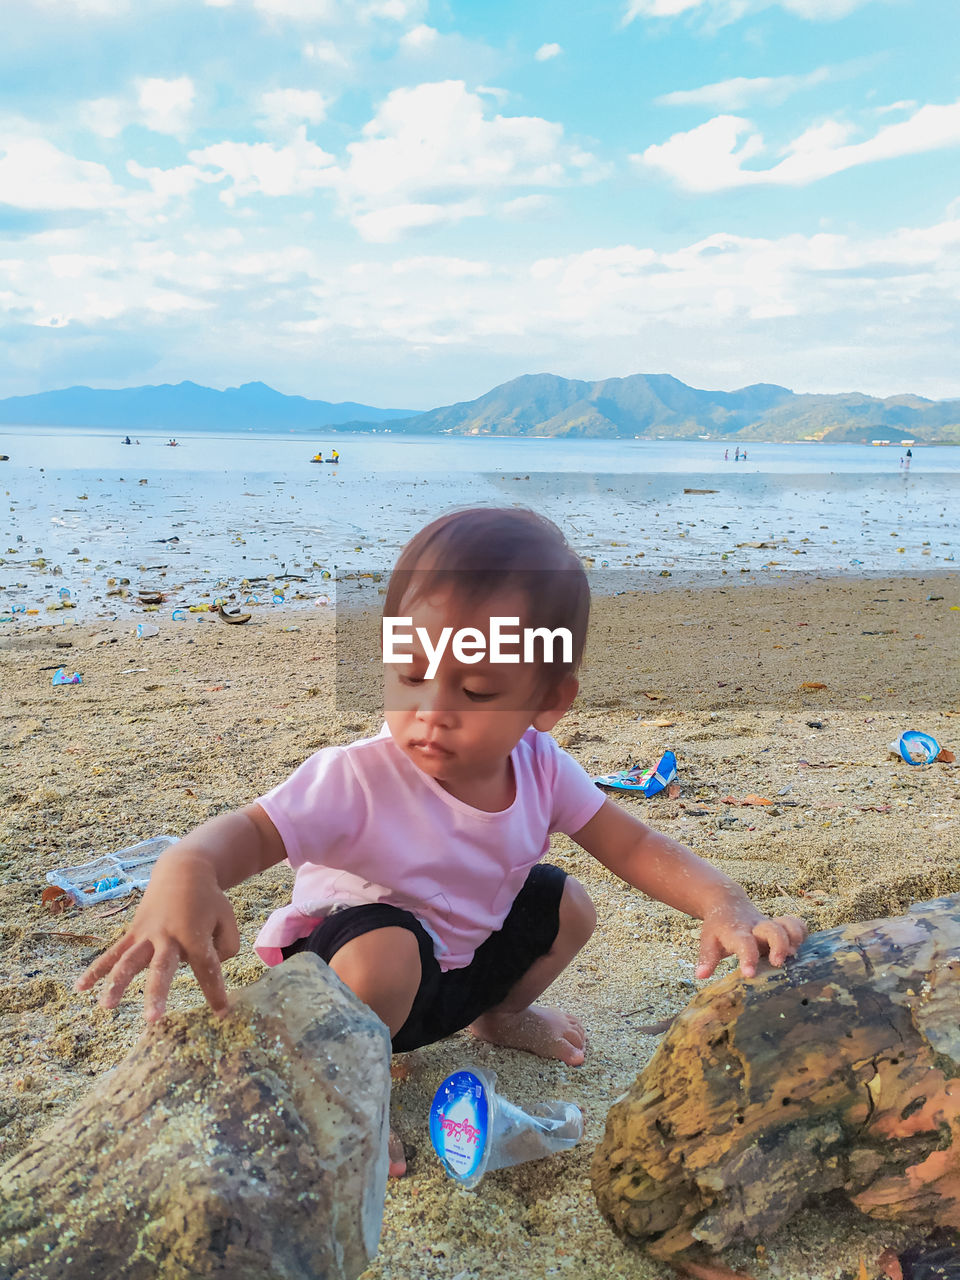 land, childhood, beach, child, one person, water, sea, vacation, nature, sand, sky, leisure activity, full length, shore, female, day, coast, ocean, holiday, toddler, lifestyles, body of water, women, innocence, casual clothing, beauty in nature, trip, rock, person, cute, outdoors, front view, looking, smiling, cloud, happiness, scenics - nature, emotion, portrait, men, enjoyment, fun